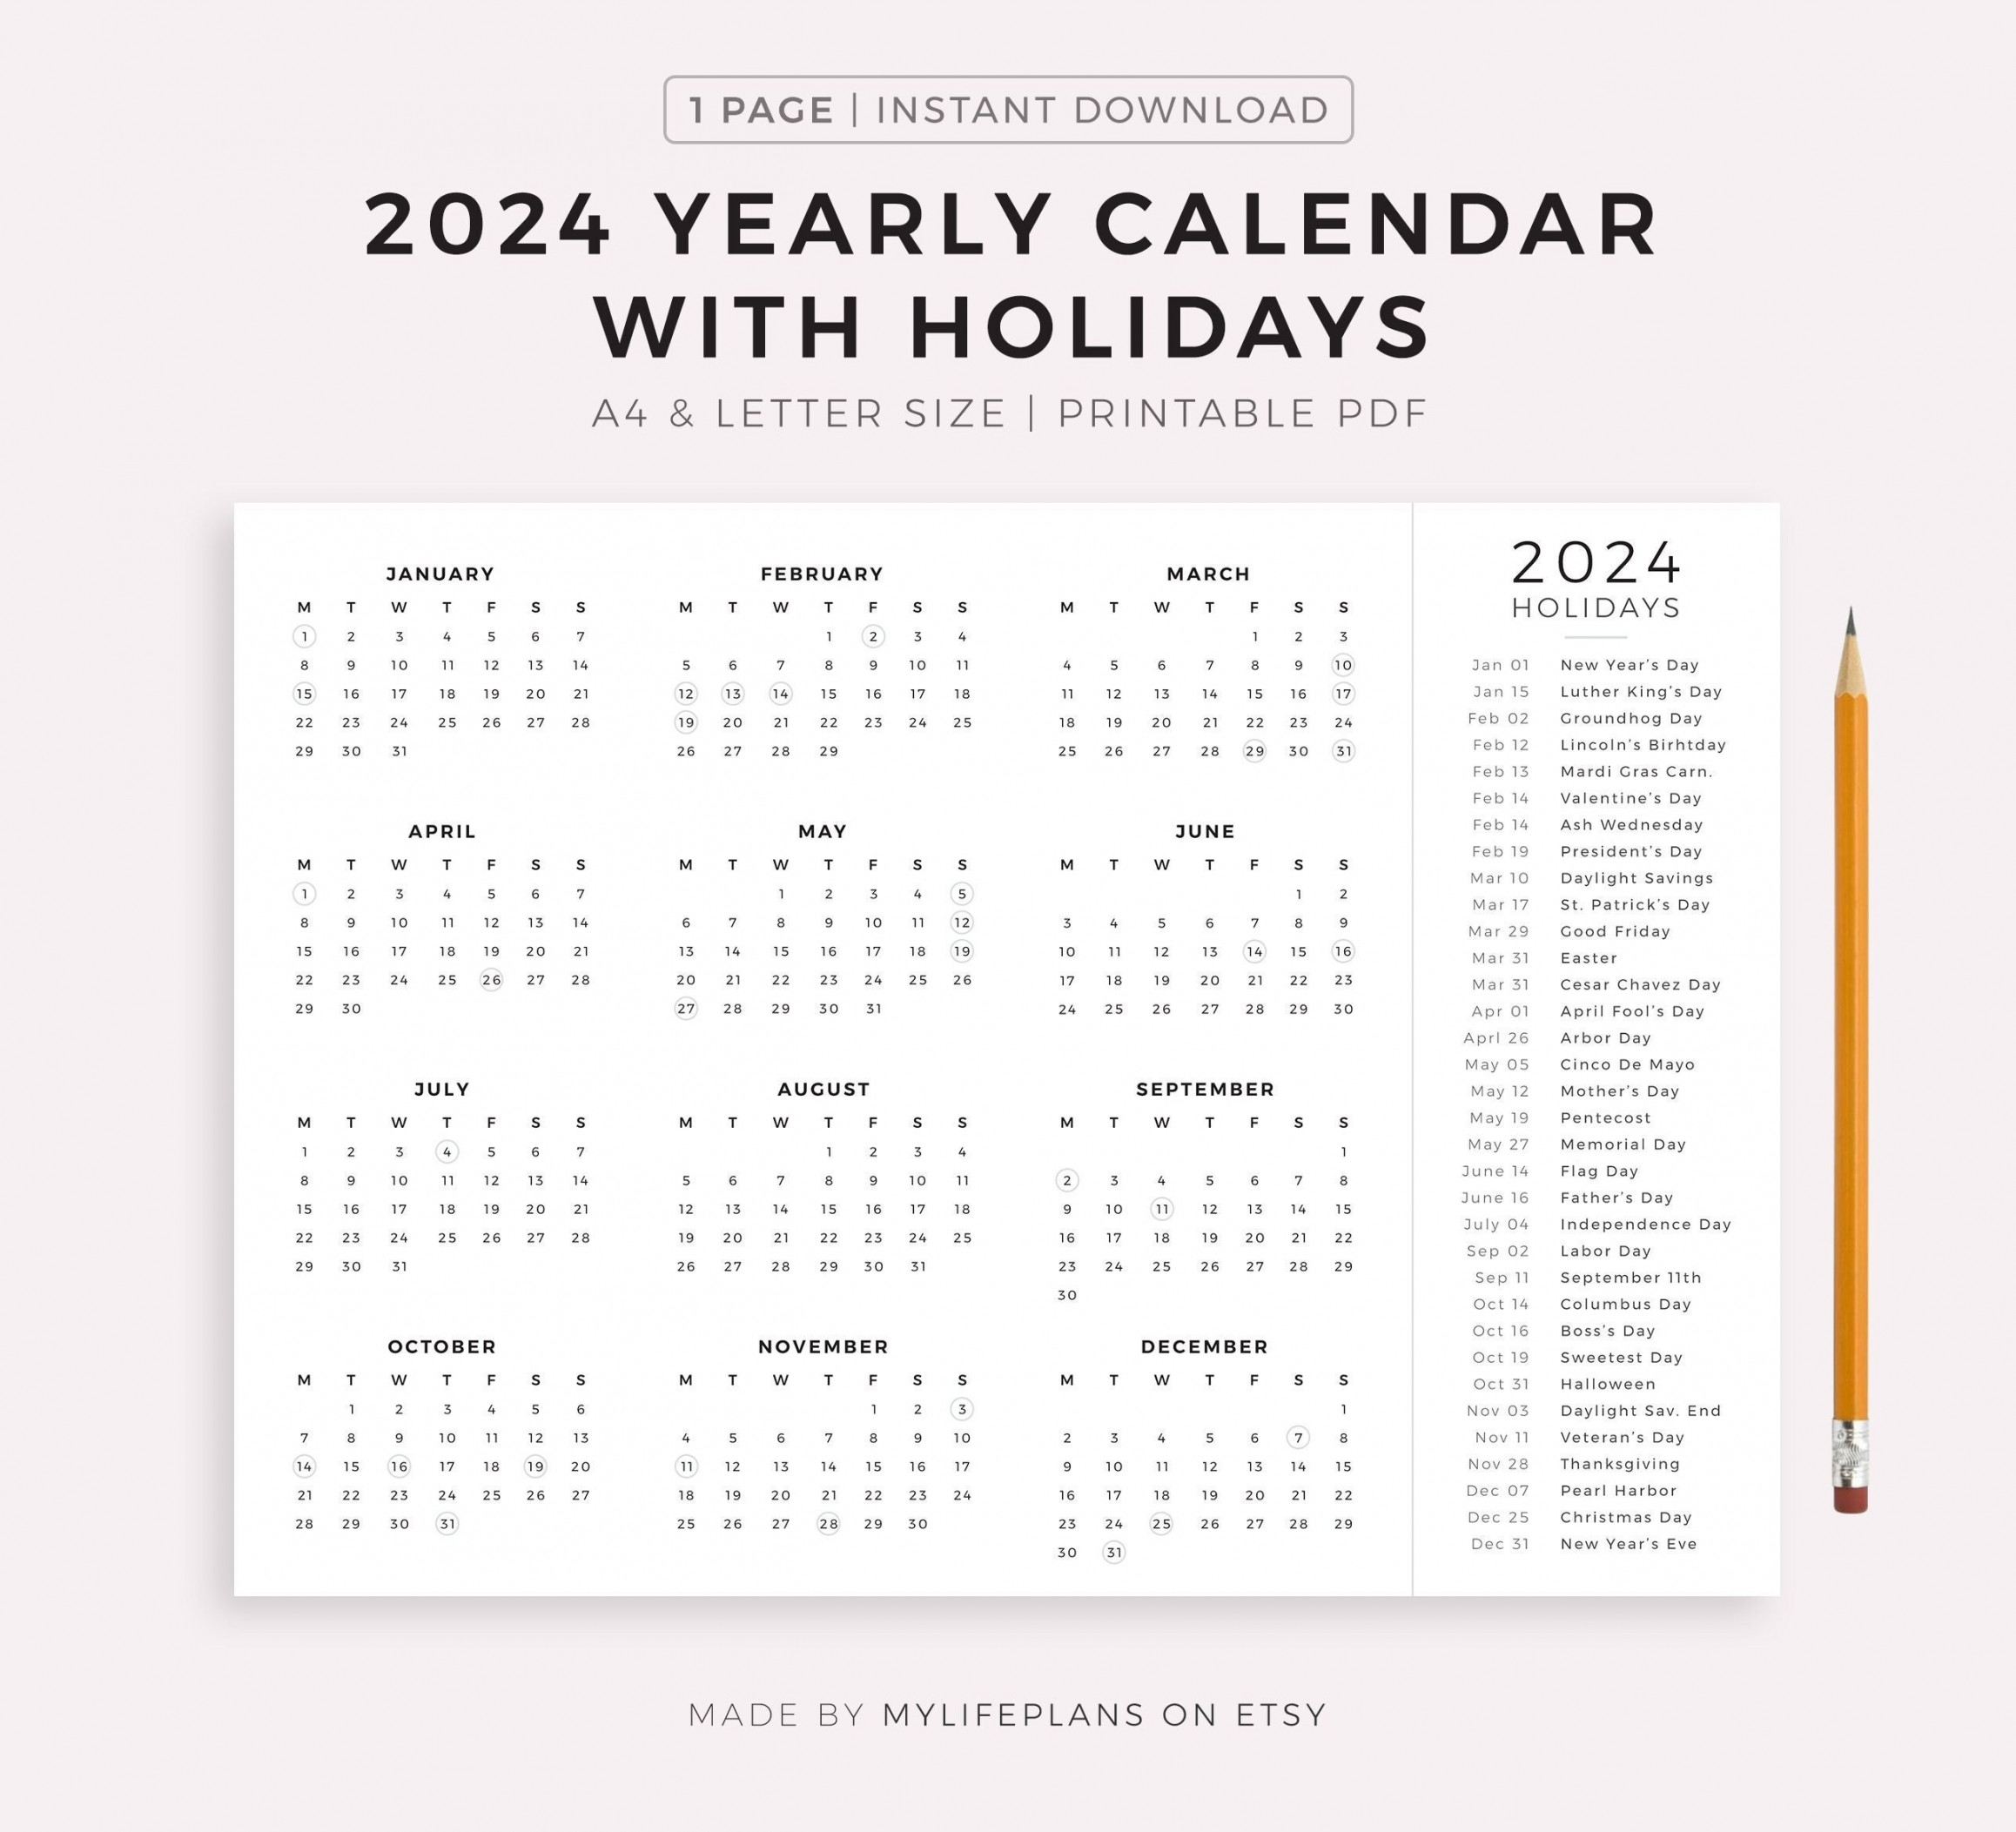 Year Calendar With Holidays on One Page Printable - Etsy Hong